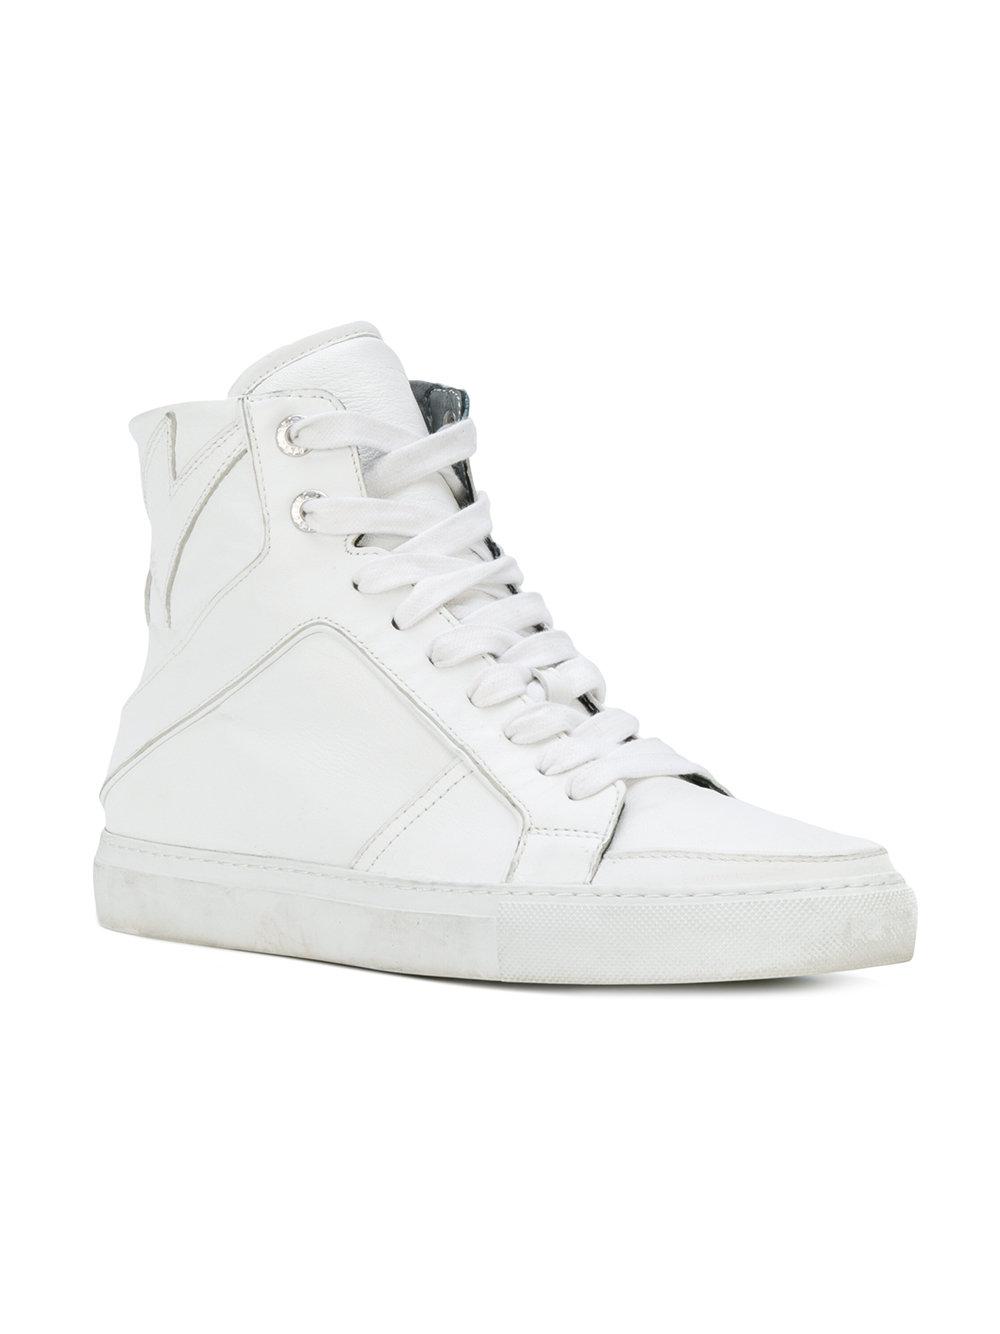 Zadig & Voltaire Leather High-top Flash Sneakers in White - Lyst